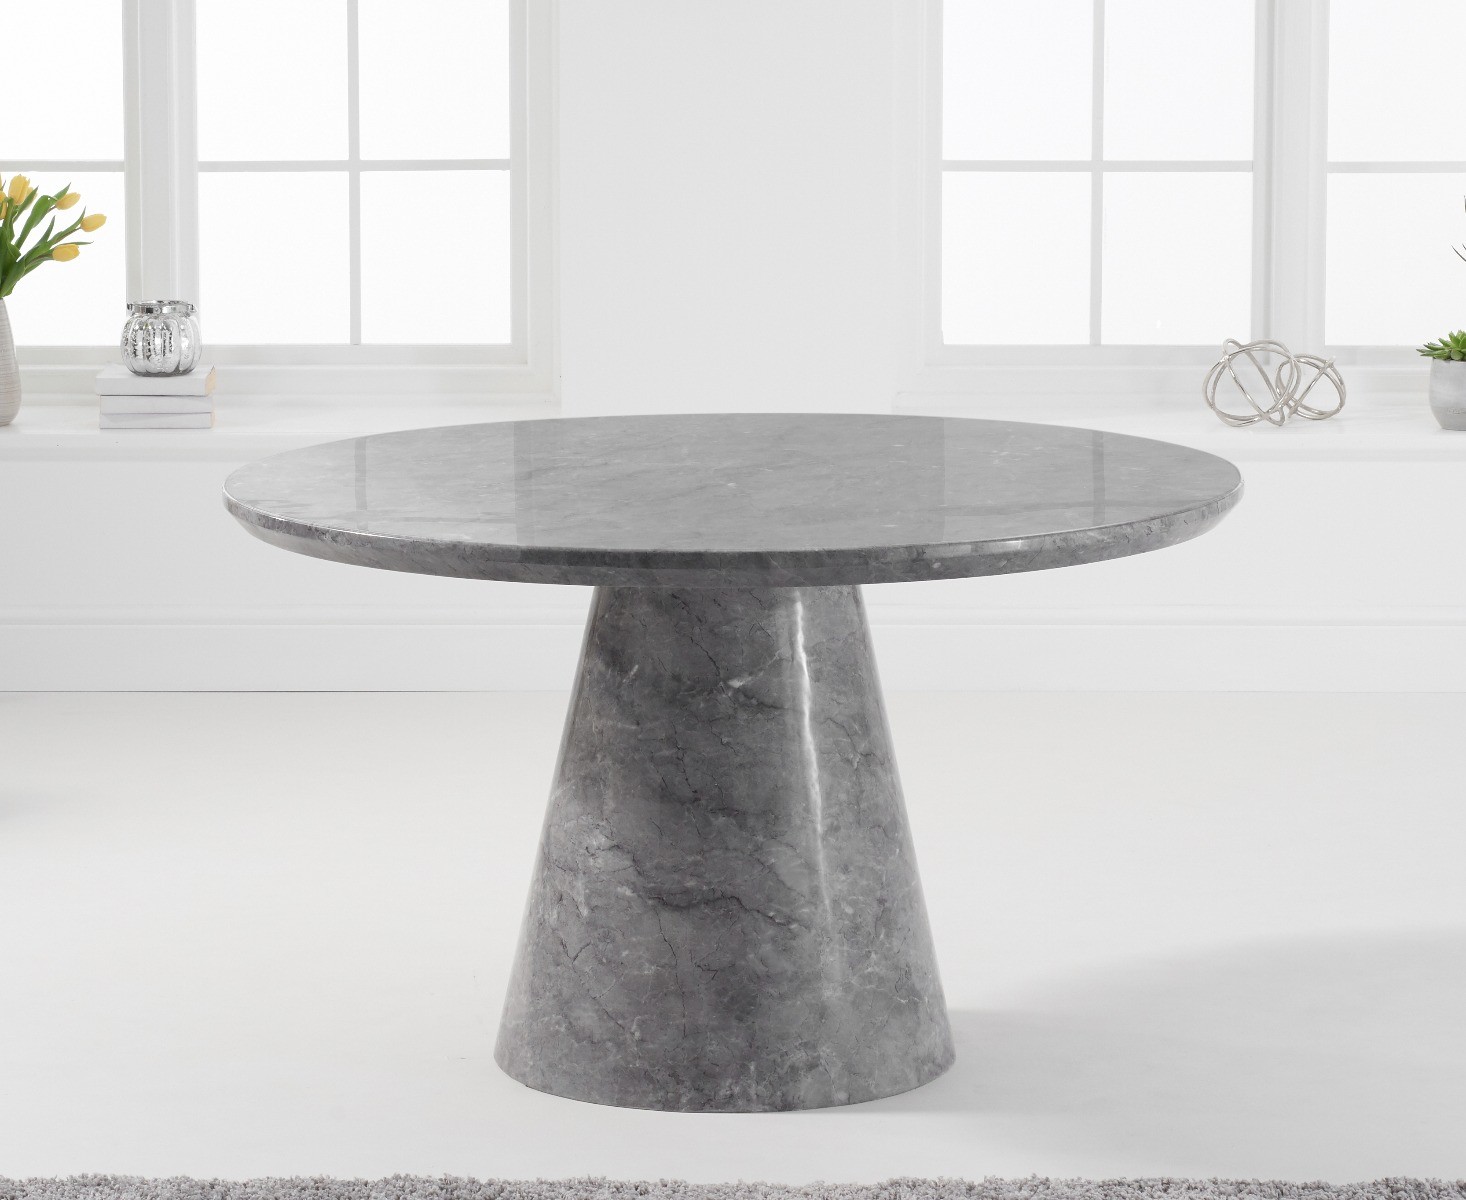 Photo 3 of Ravello 130cm round grey marble dining table with 4 grey sienna velvet chairs